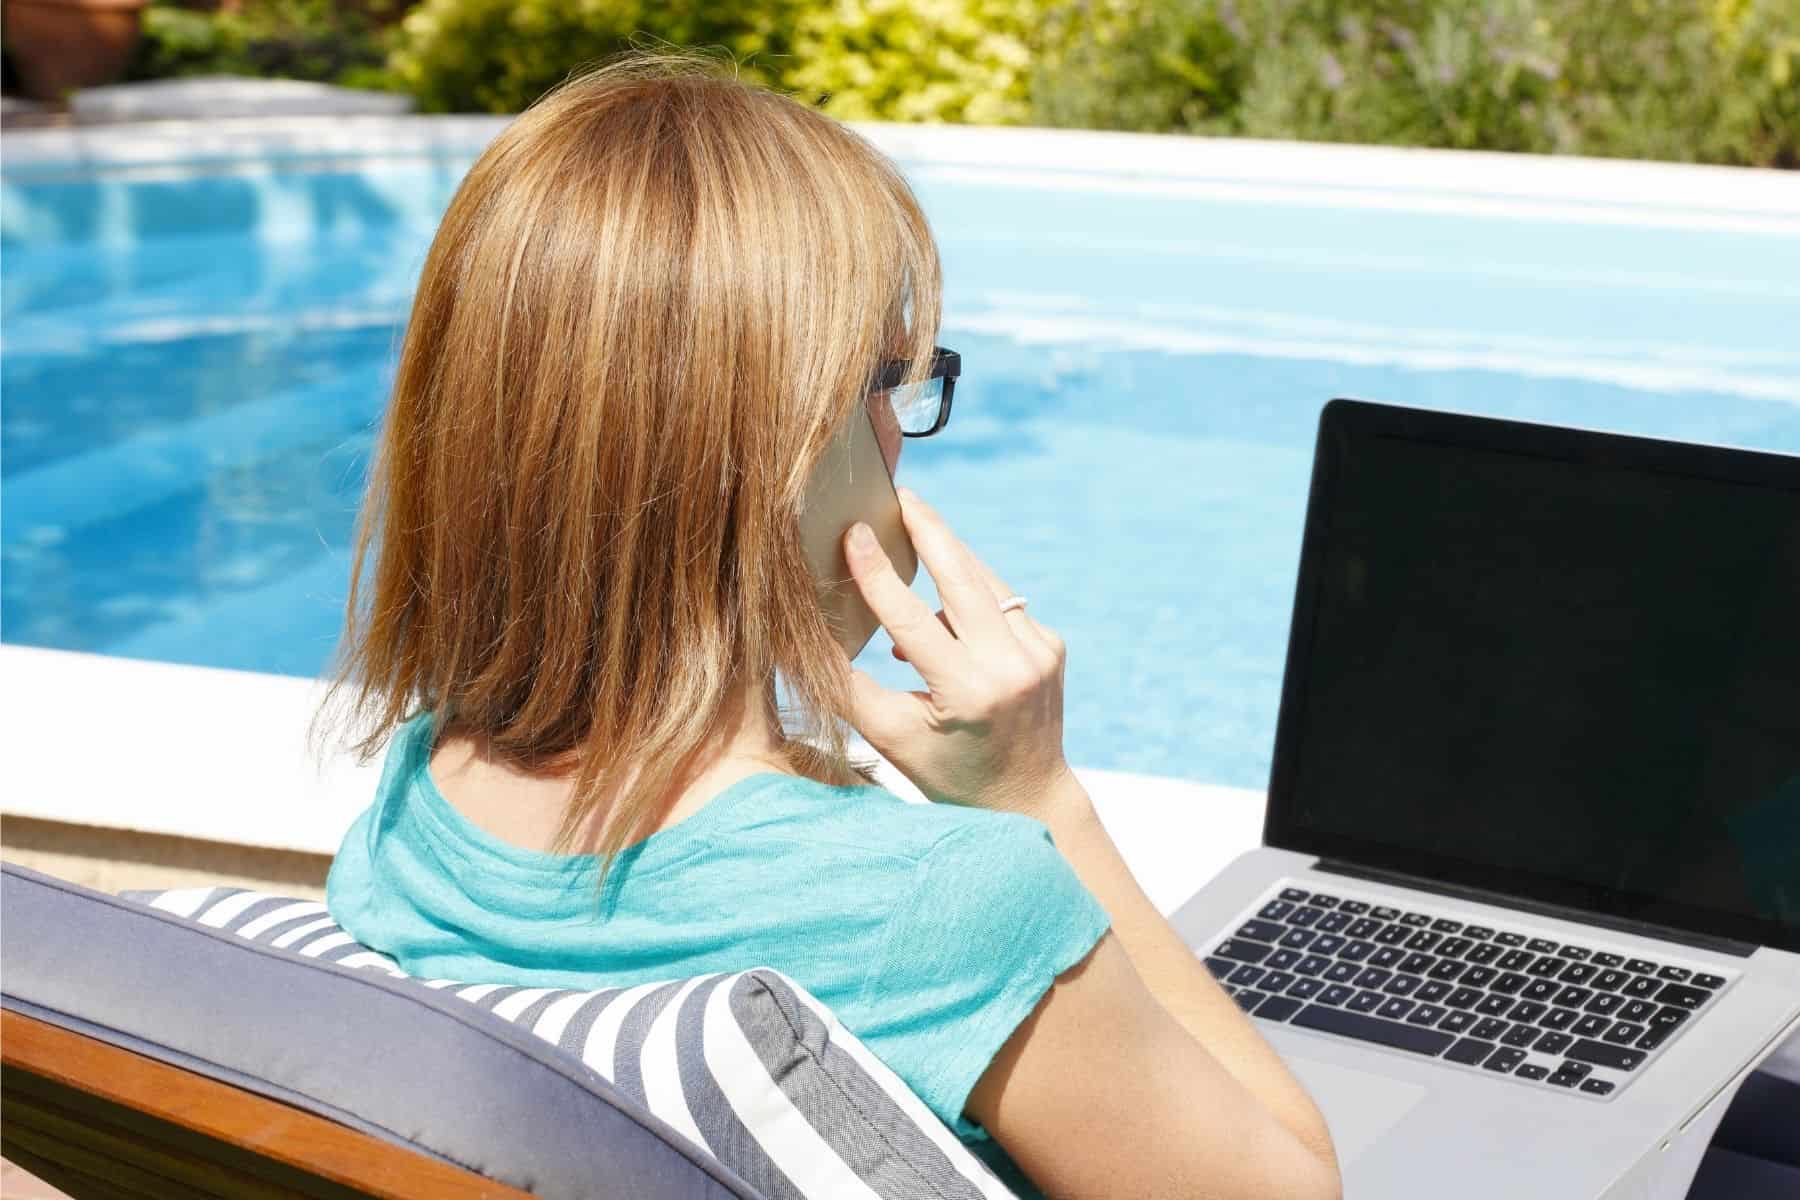 Lady on phone by pool